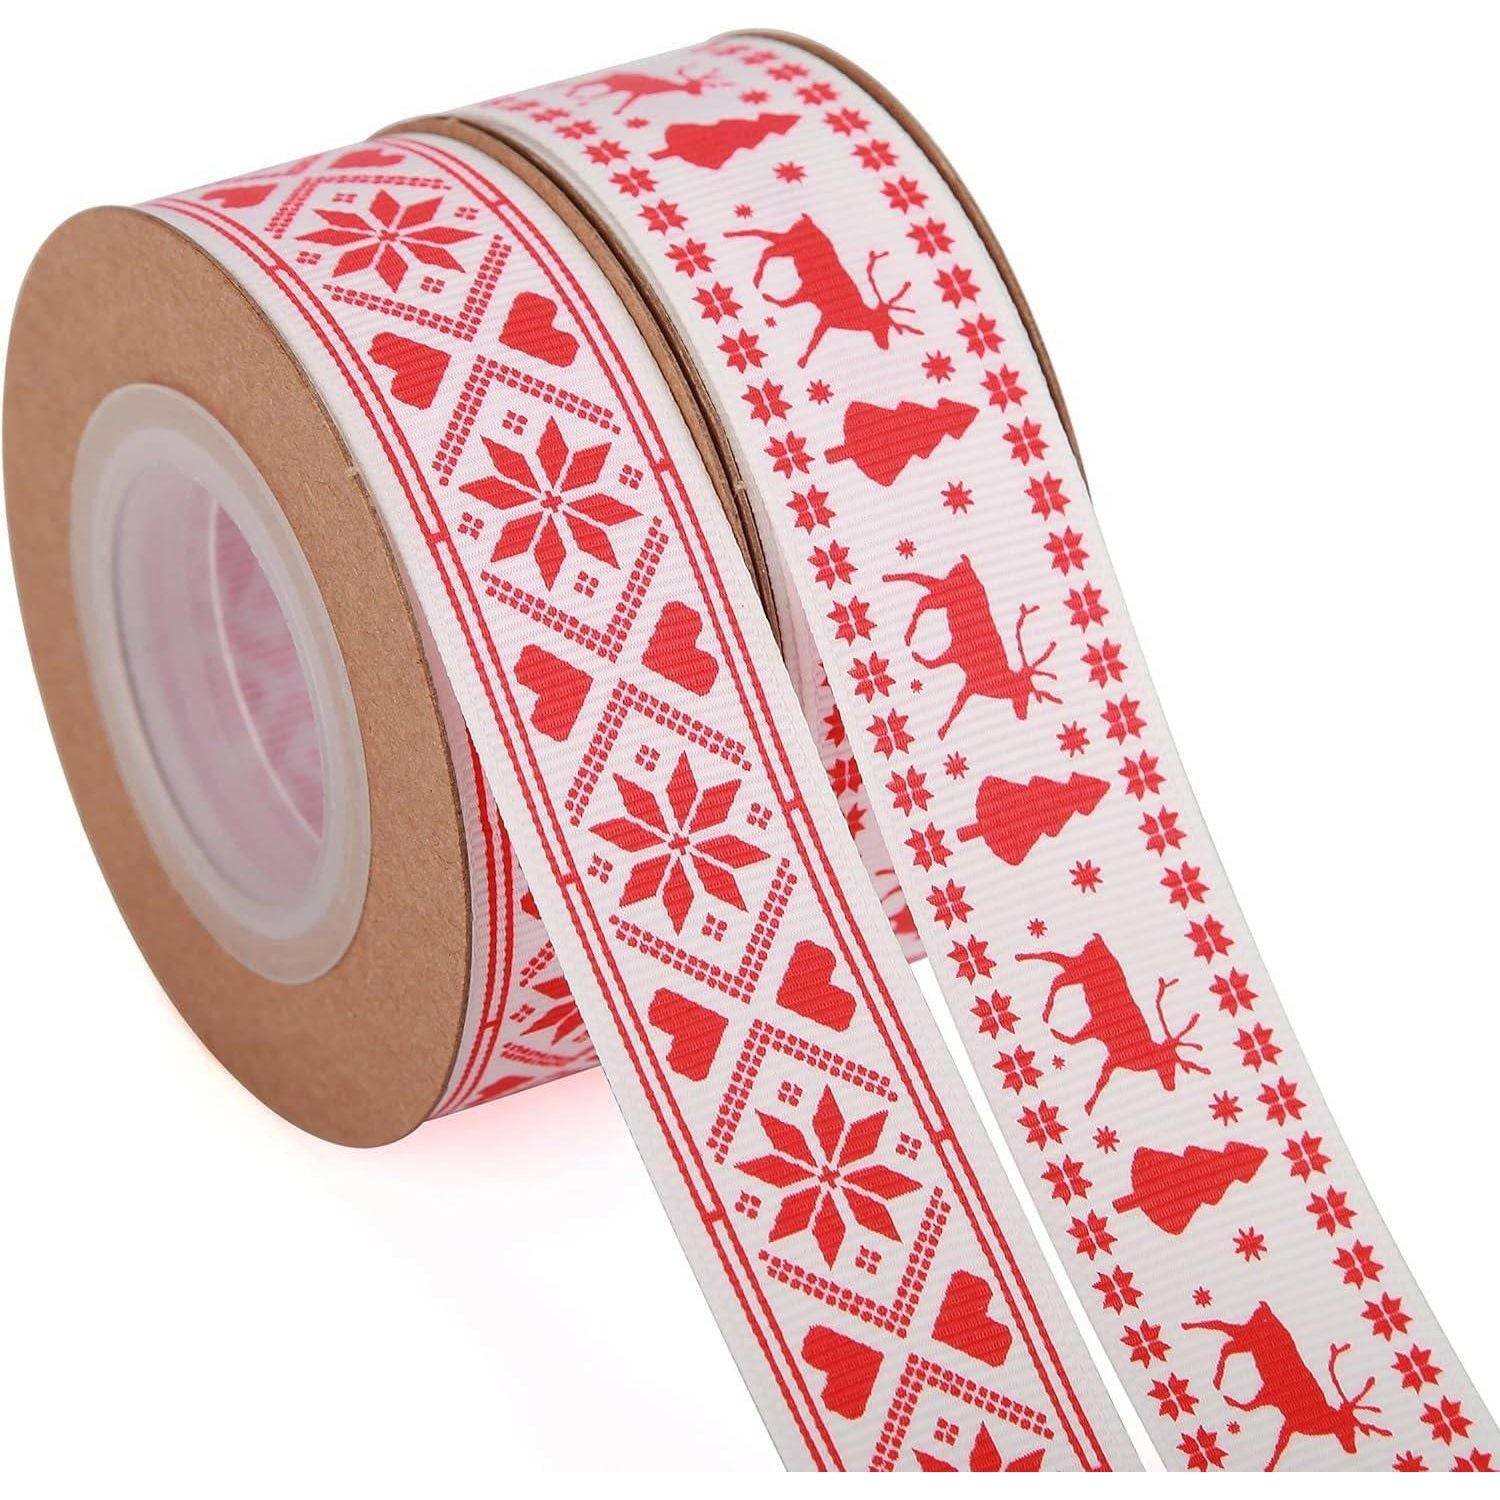 Scandinavian Christmas Ribbon Total 20 Yards 1 Inch Wide Red and White Nordic Trim Scandi Reindeer and Snowflake Ribbon